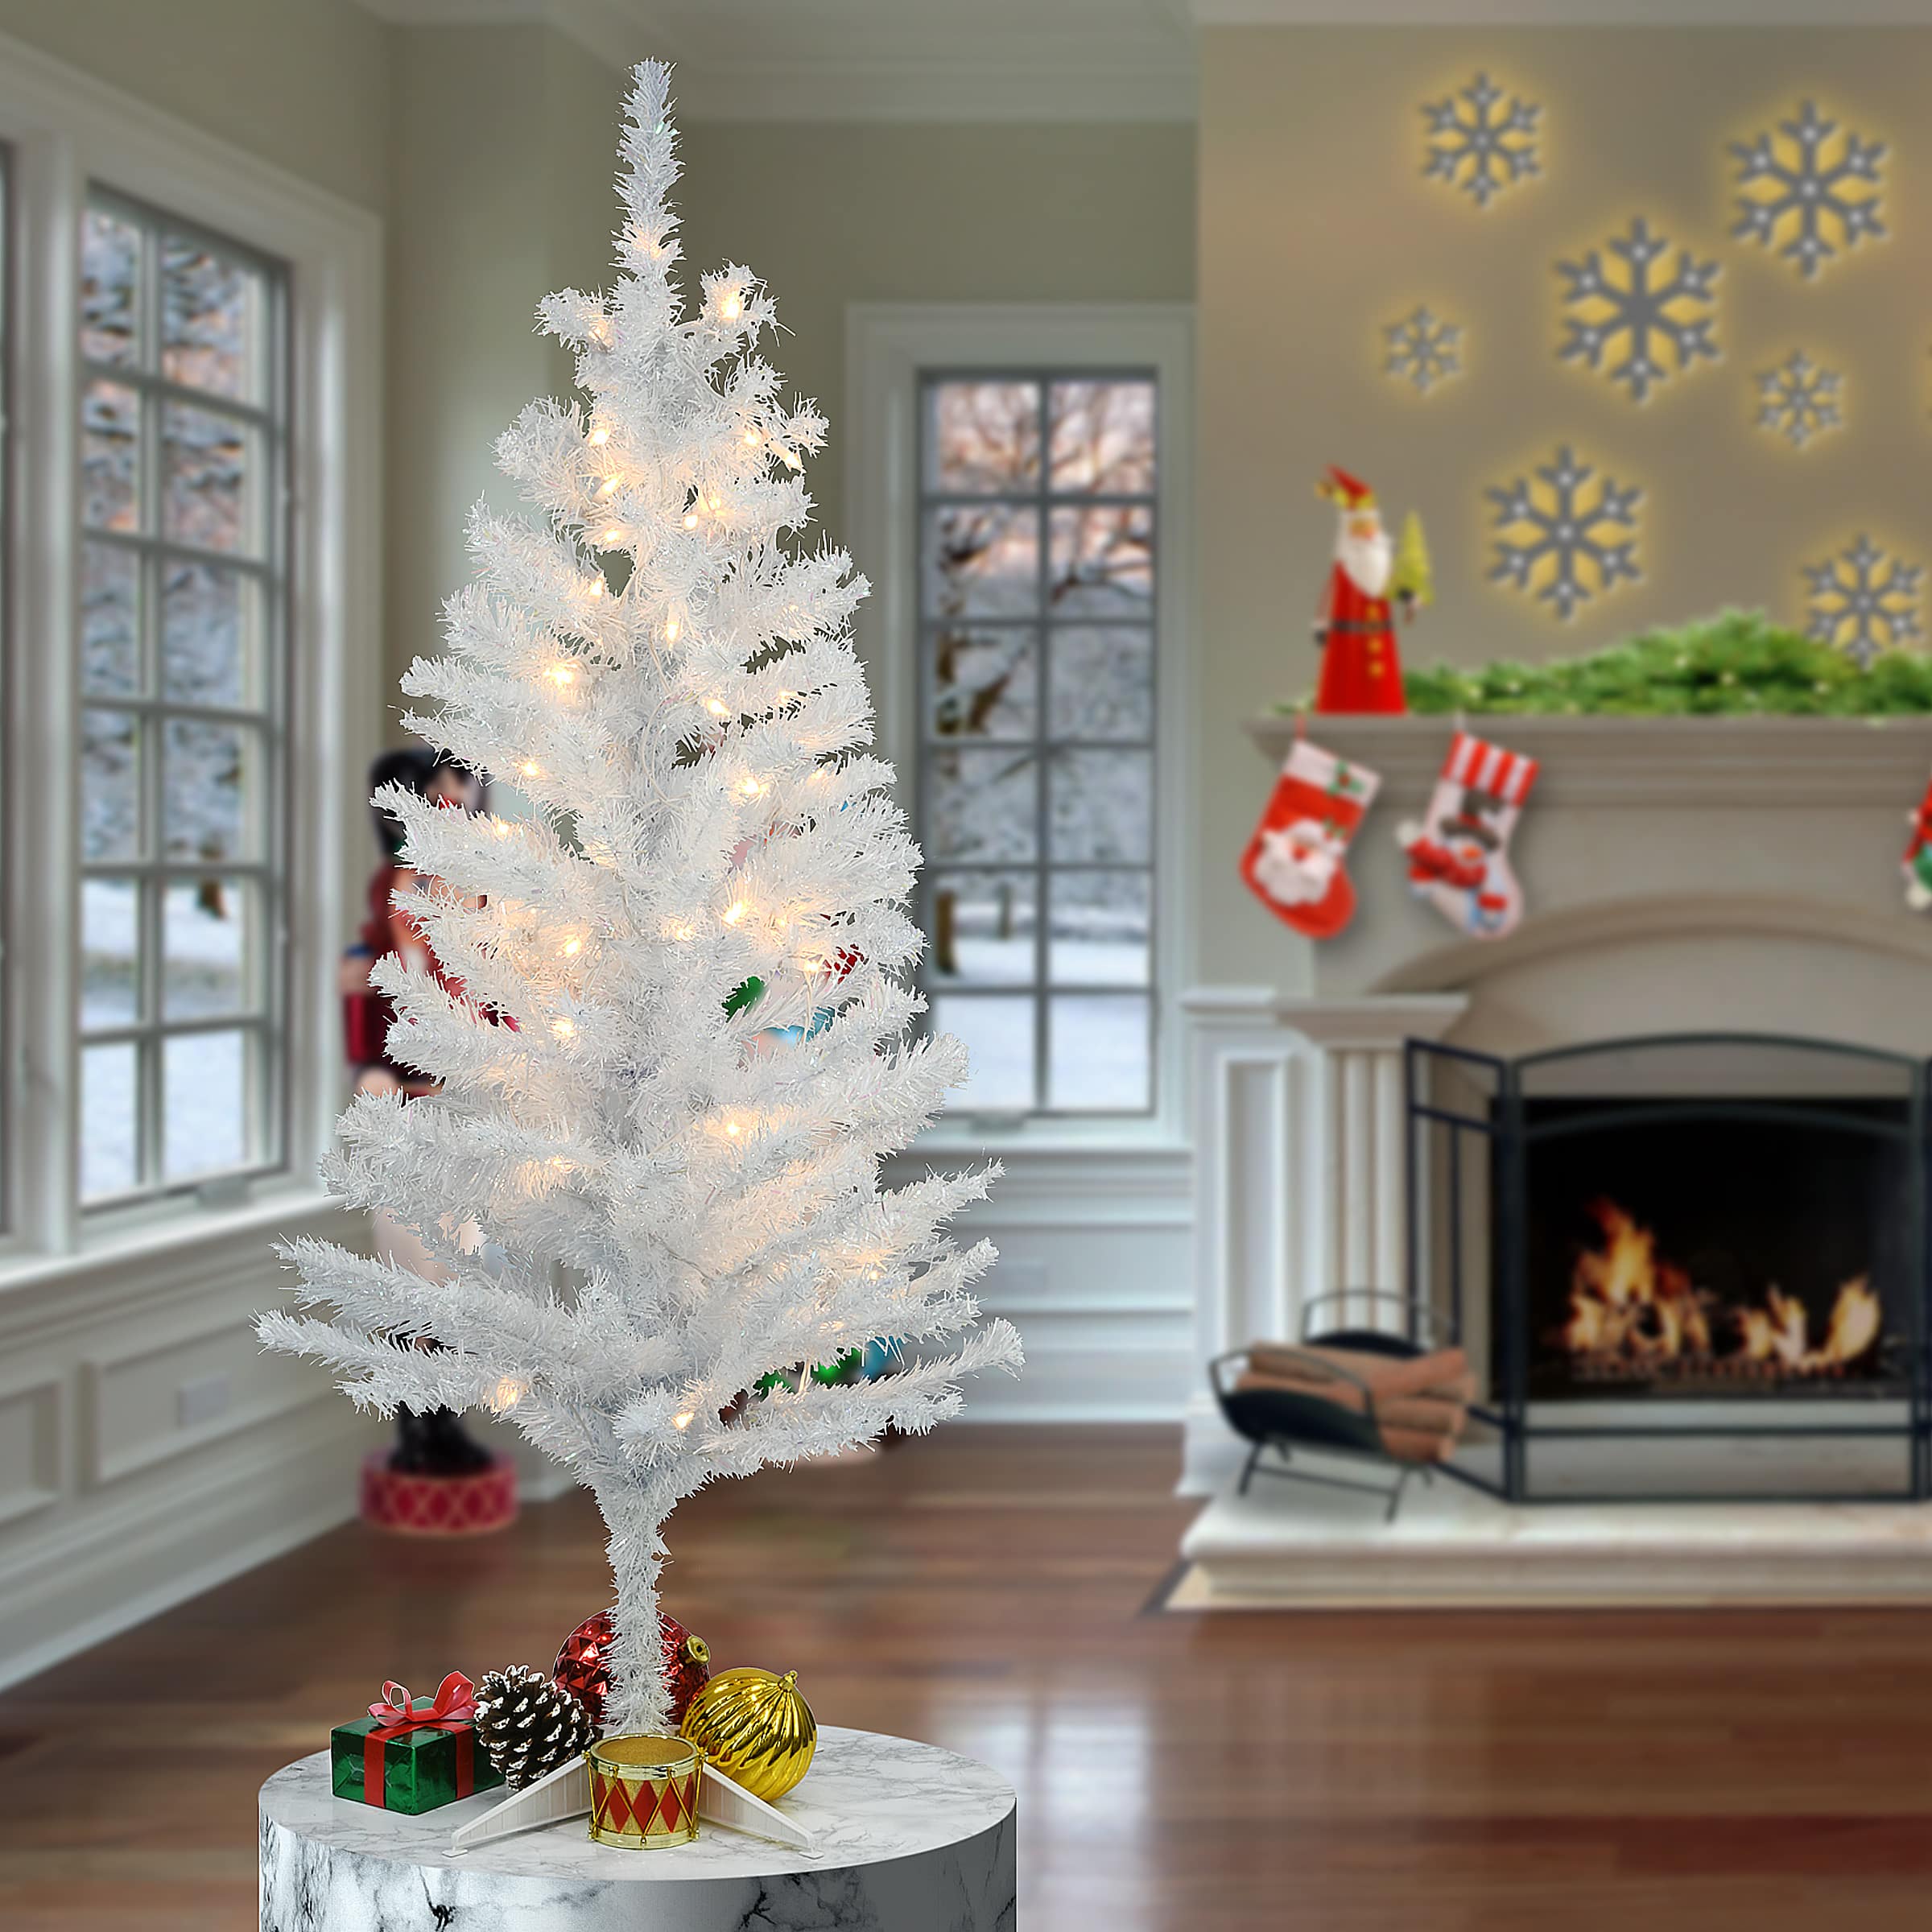 4ft. Pre-Lit White Iridescent Tinsel Artificial Christmas Tree, Clear Lights